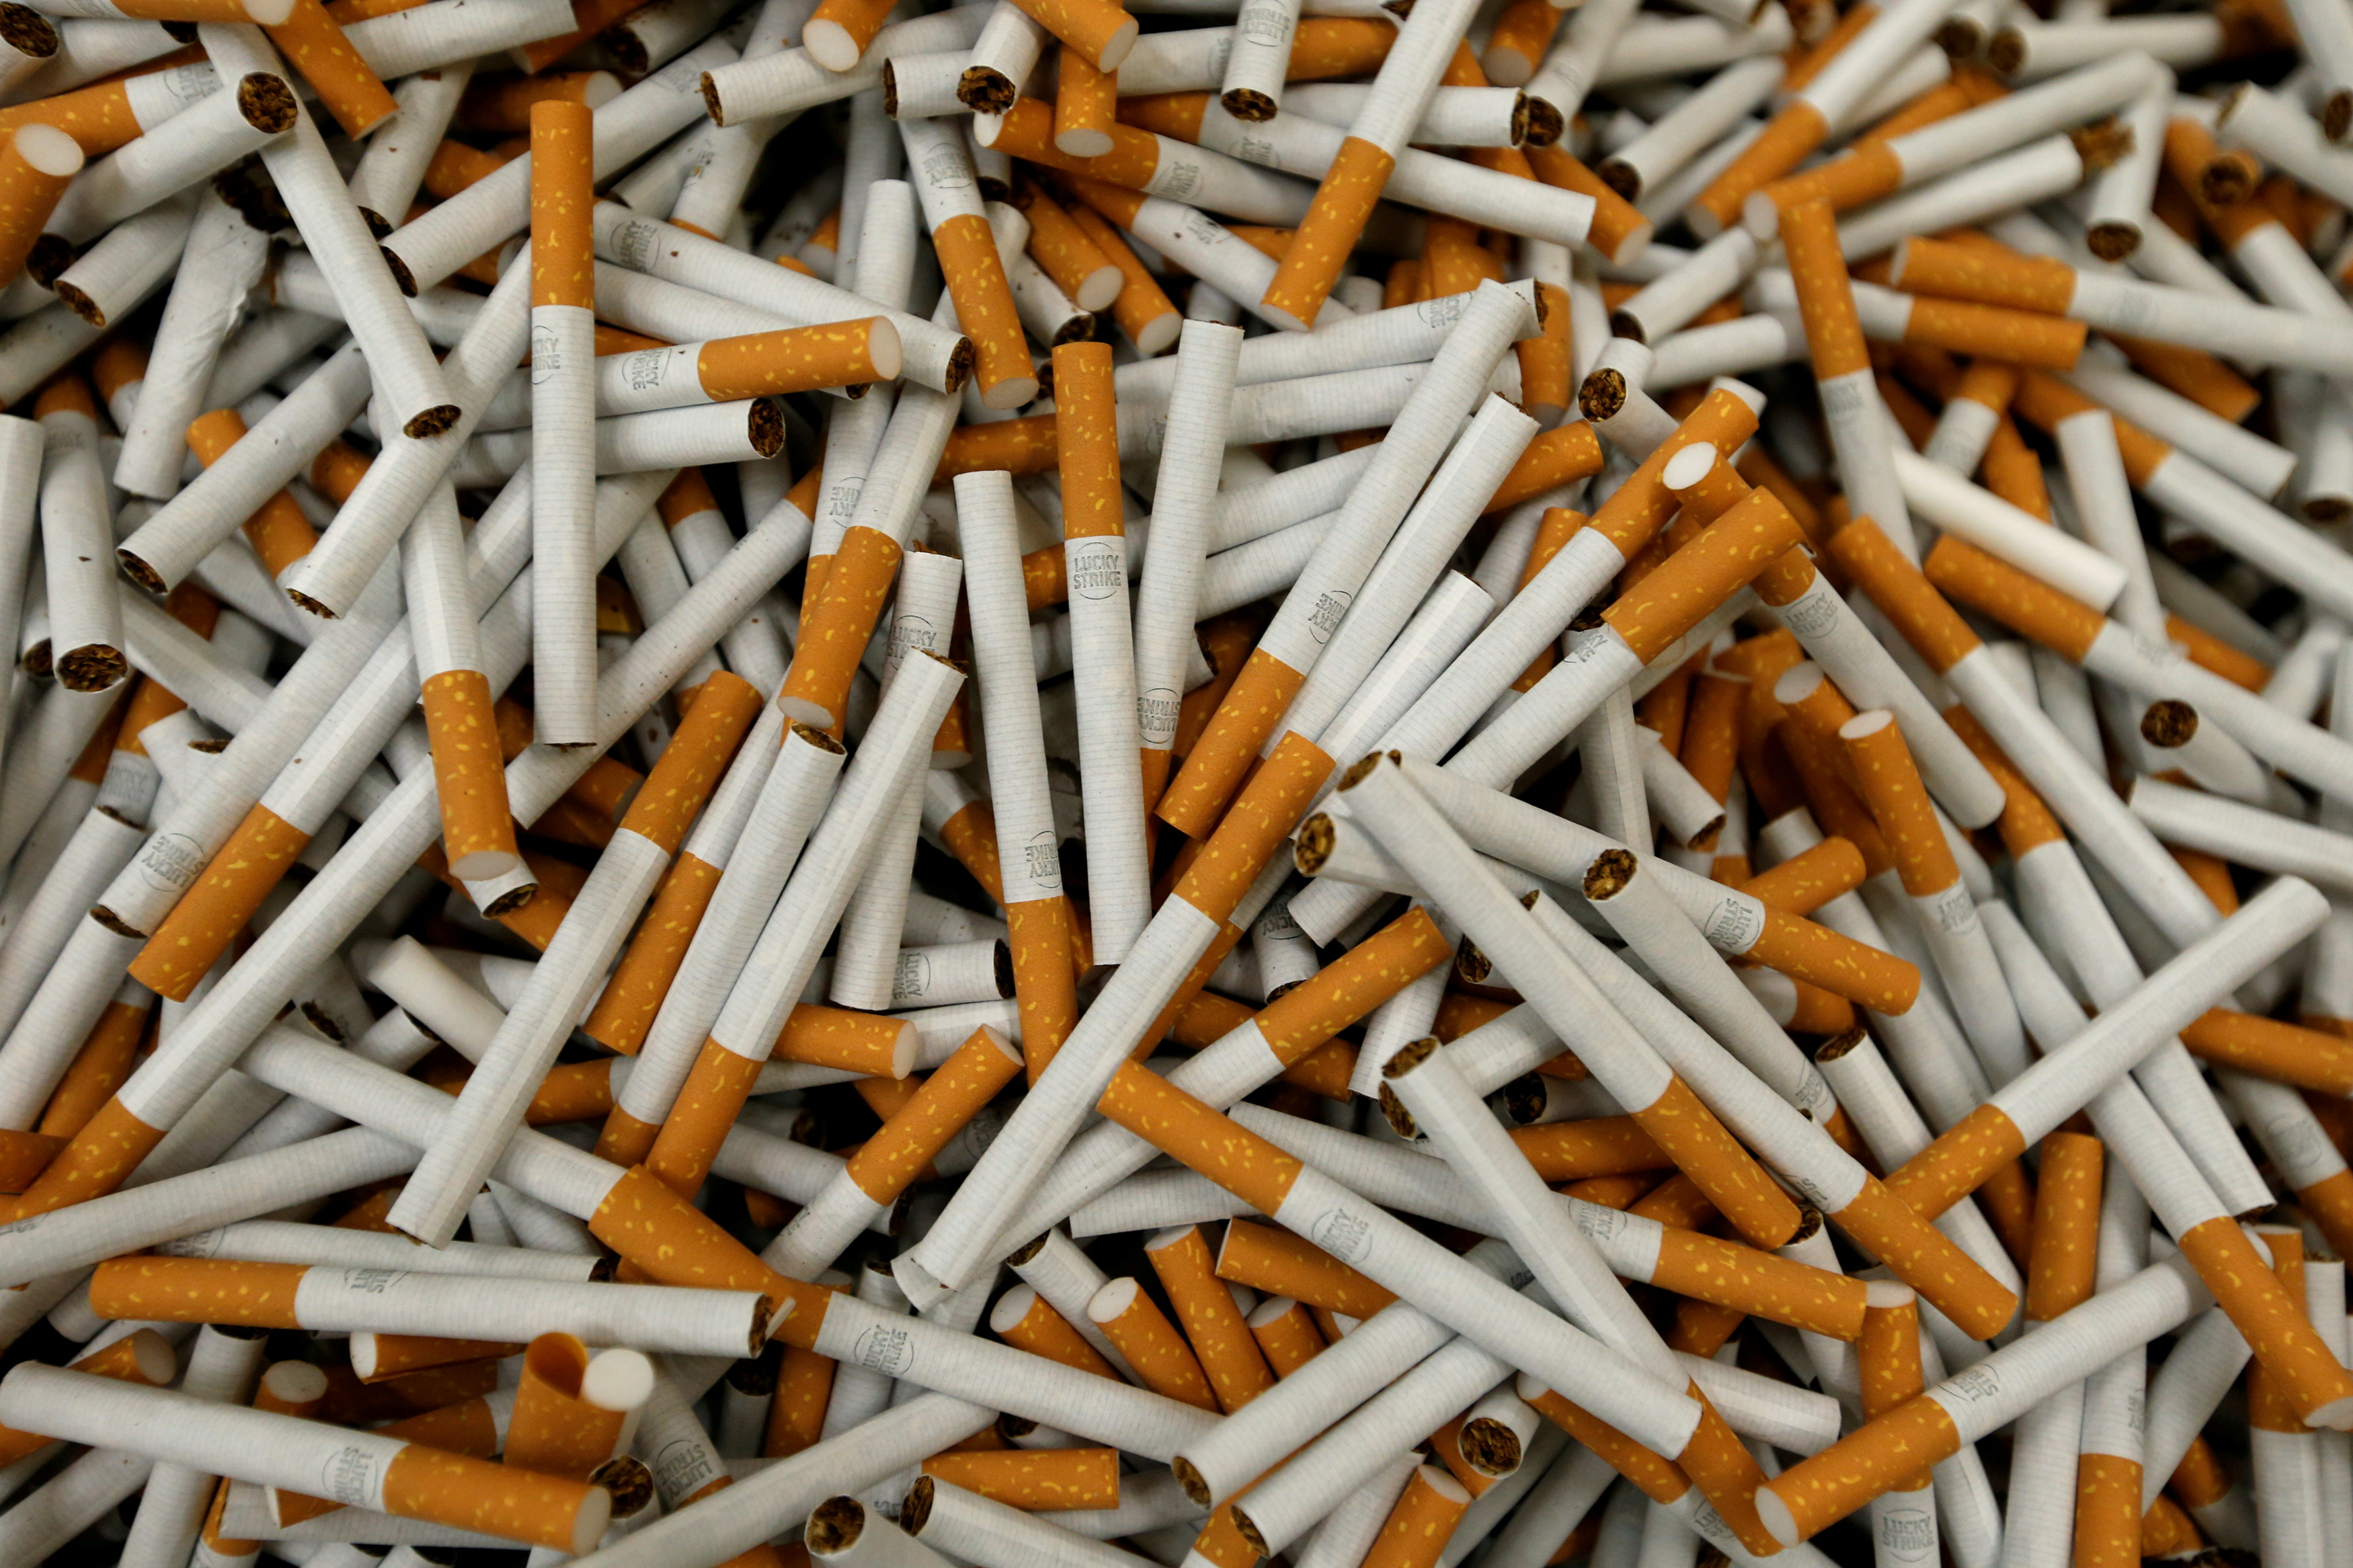 Lucky Strike cigarettes are seen during manufacturing process in BAT Cigarette Factory in Bayreuth